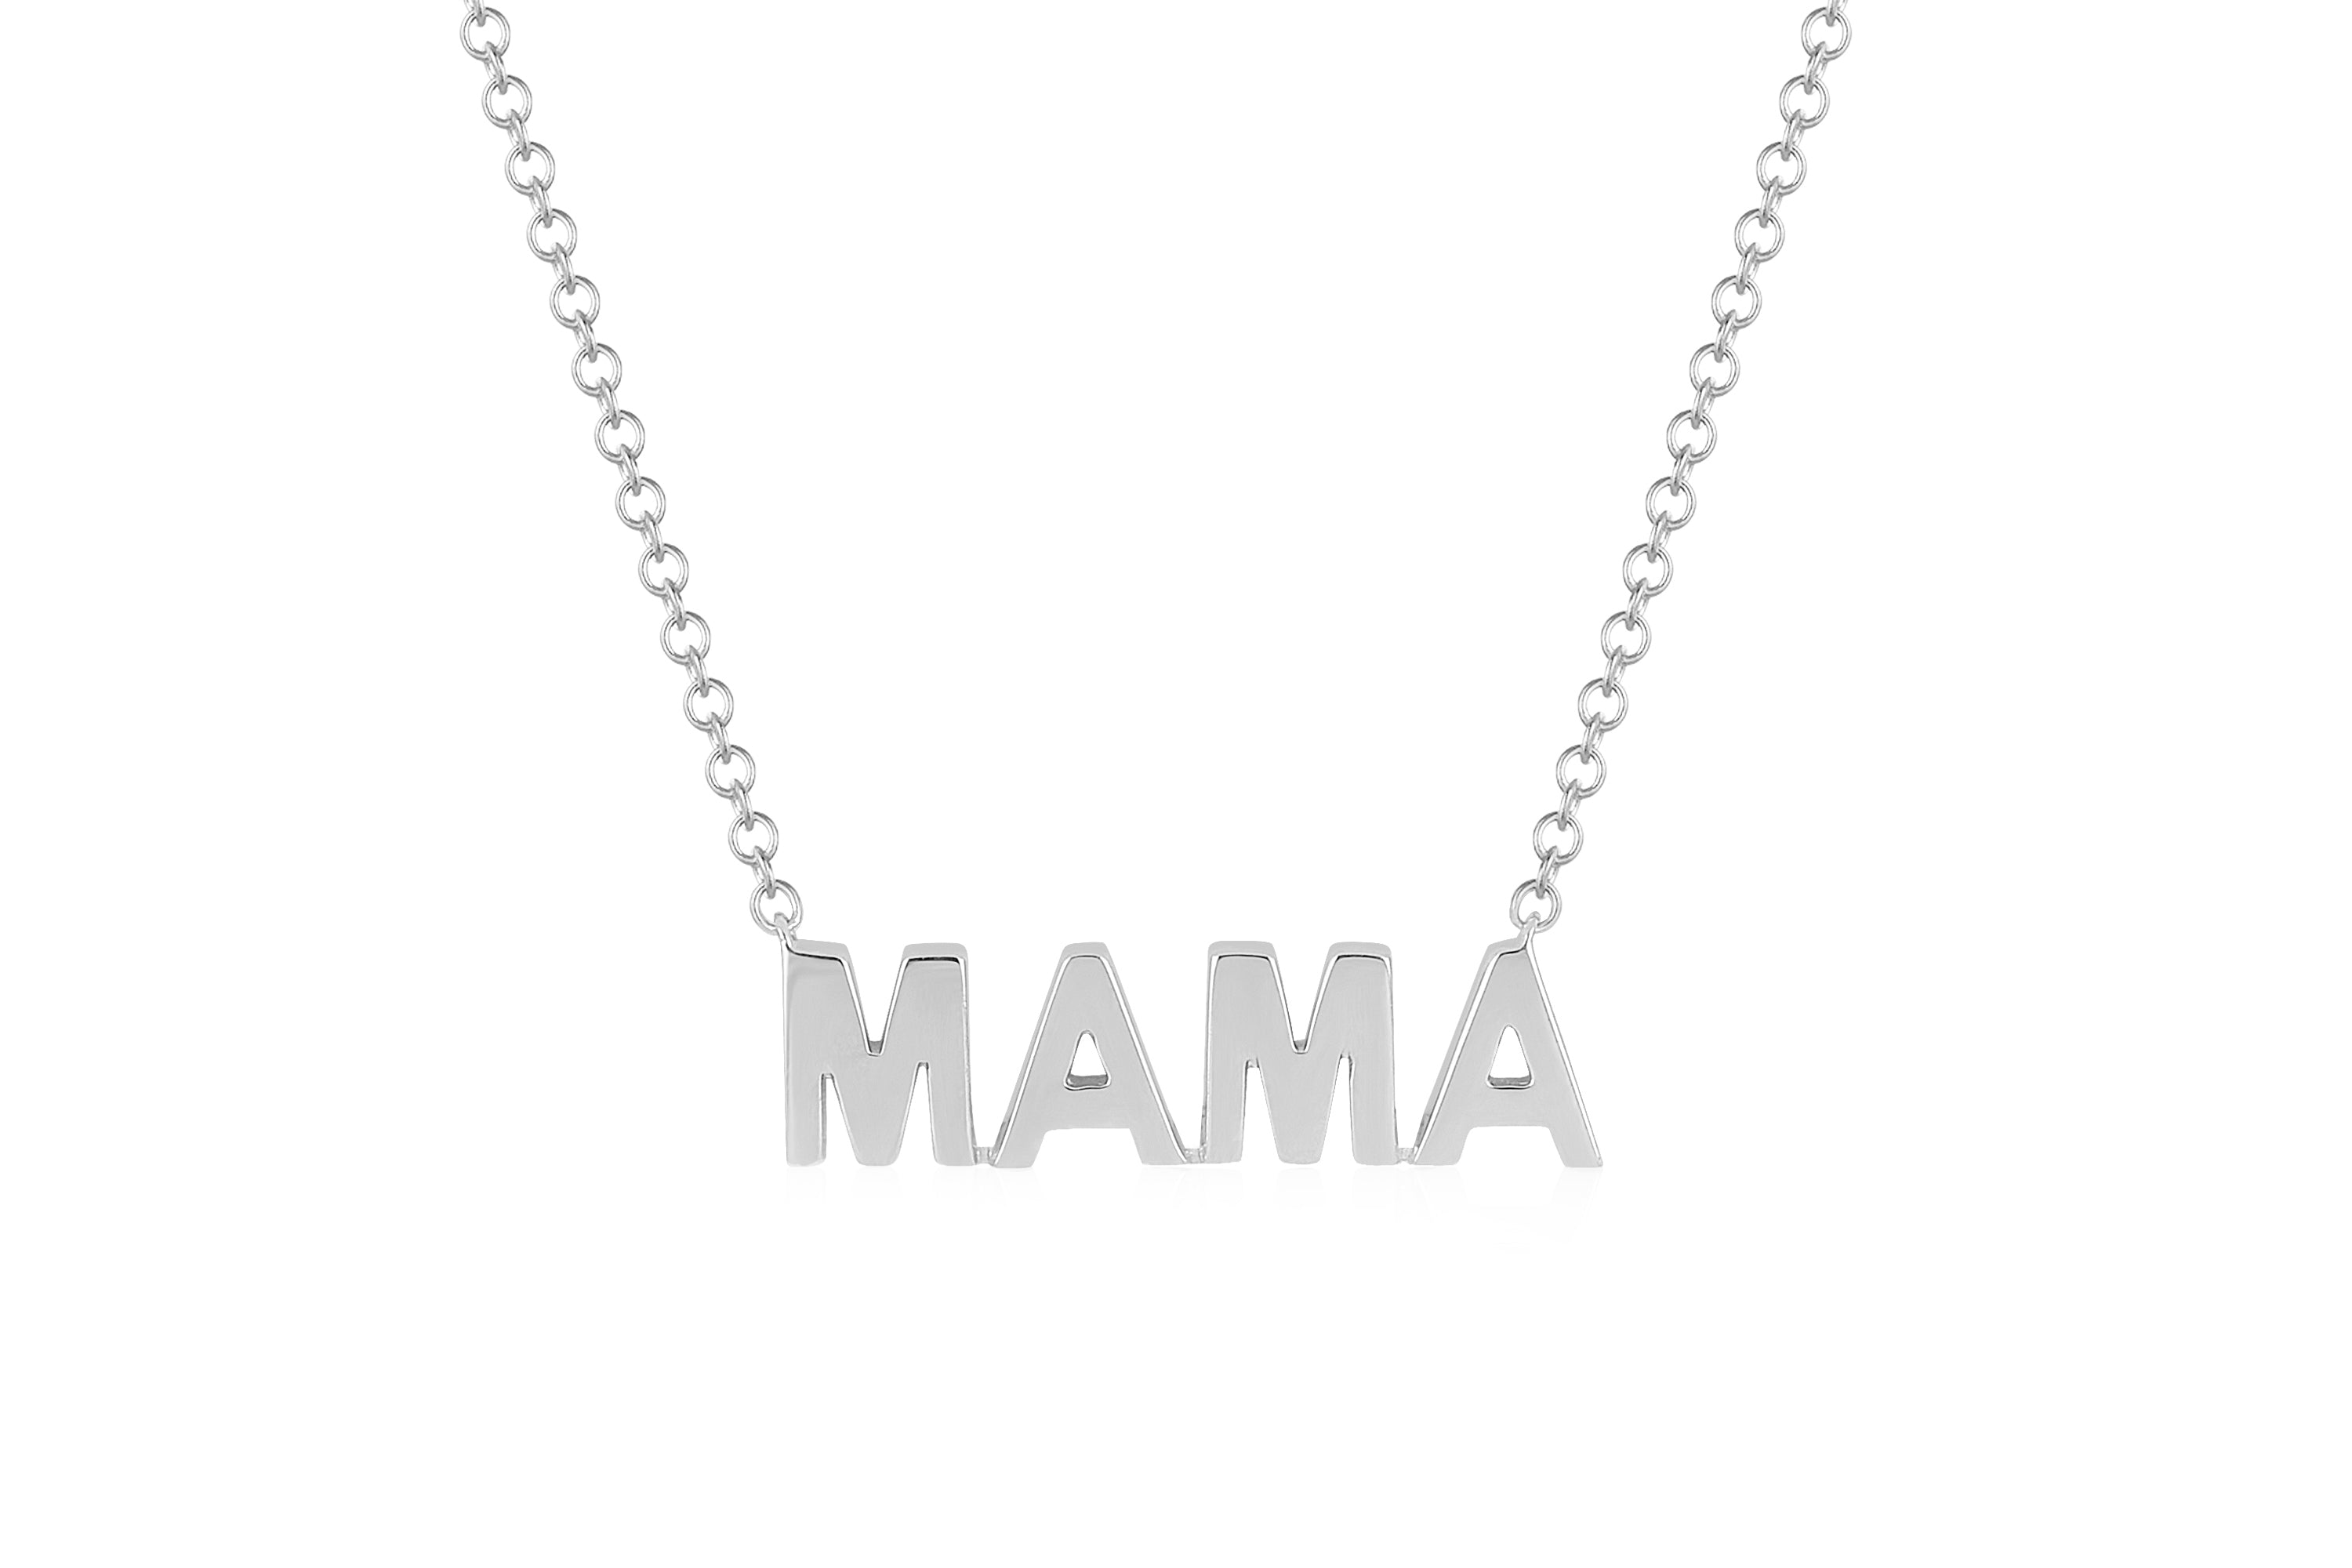 Mini Gold Mama Initial Necklace